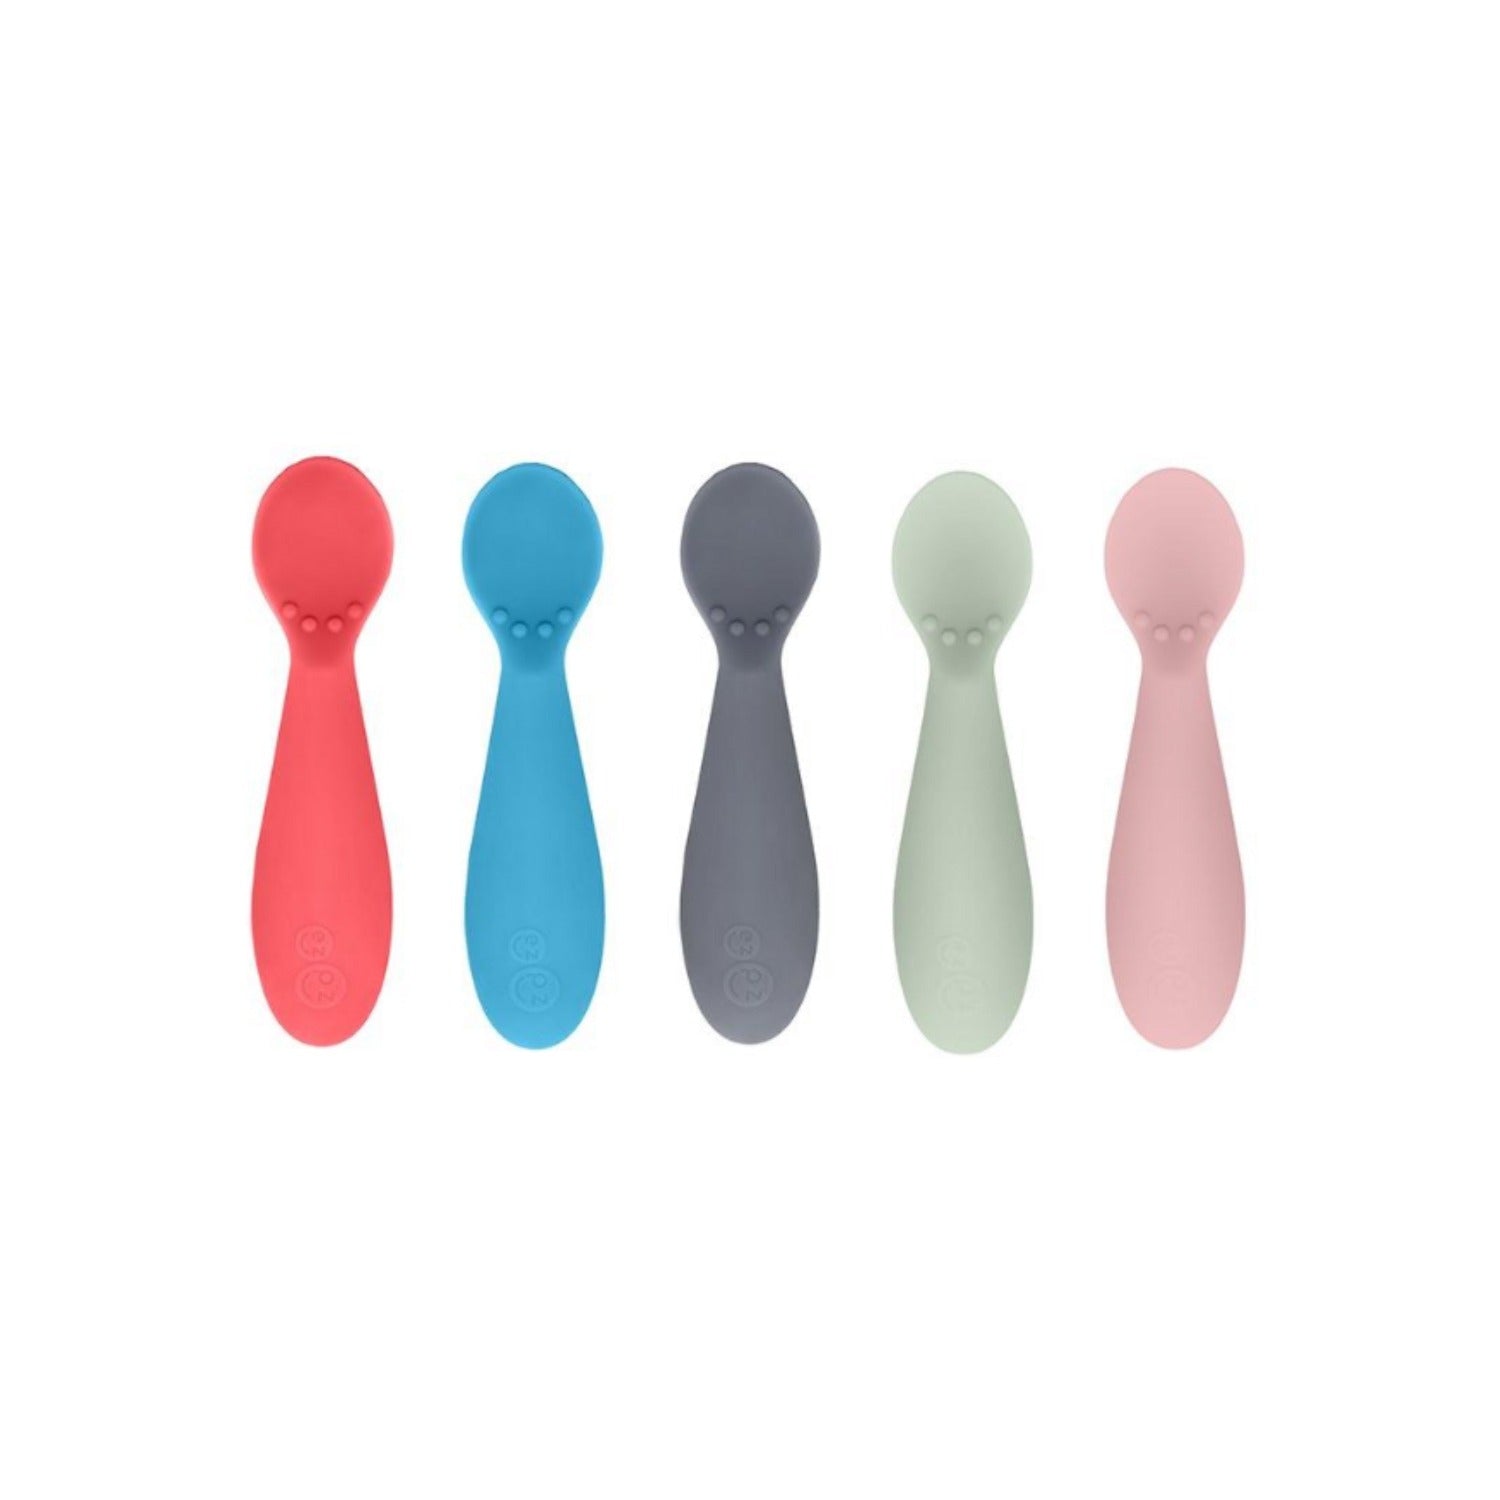 Tiny Spoon by EZPZ - 2-Pack - Silicone Spoons for Self-Feeding